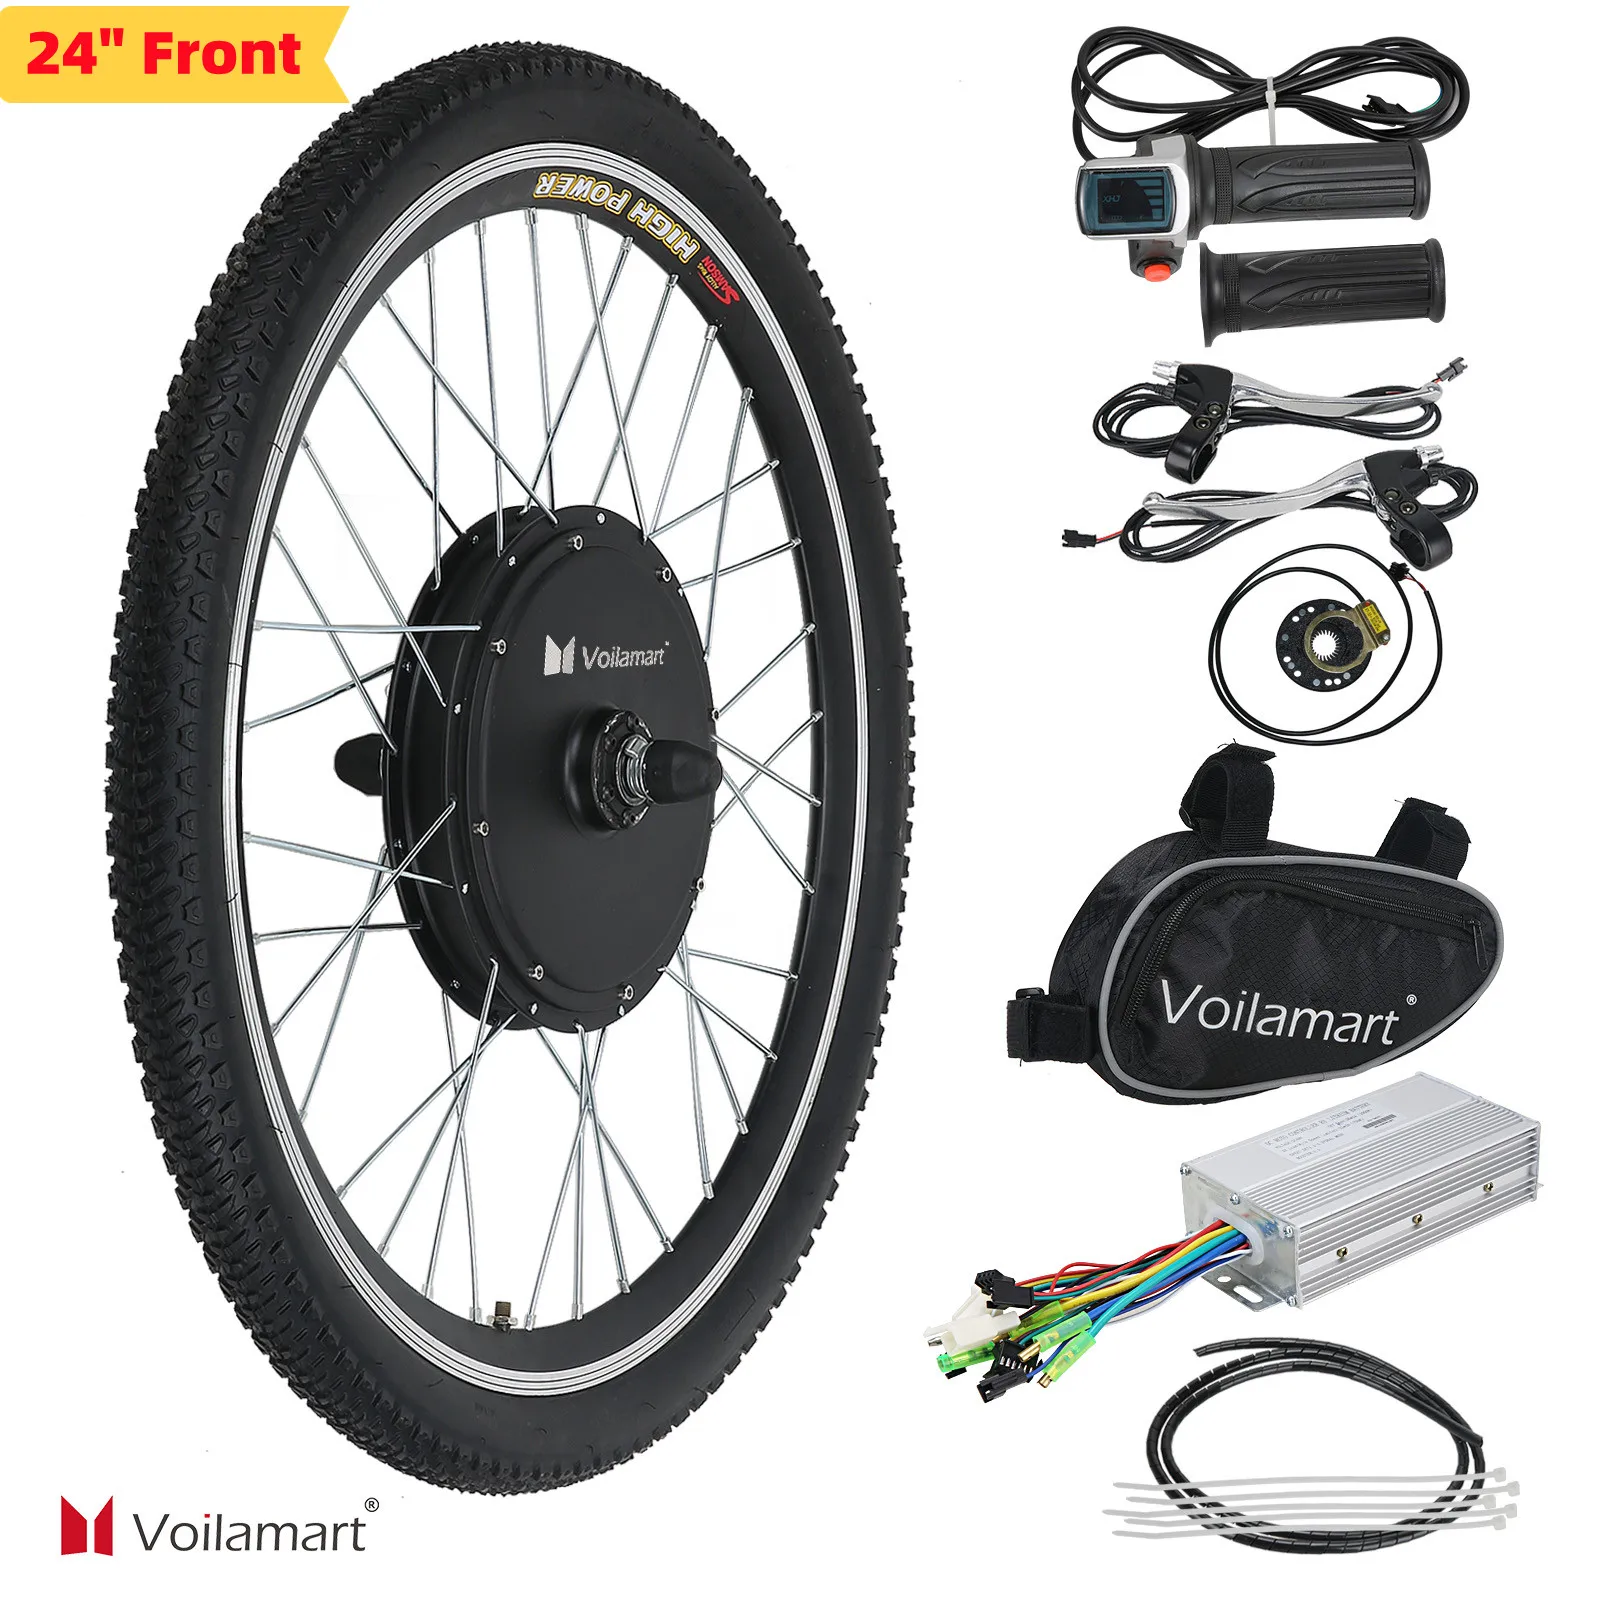 

Voilamart 24inch 48V 1000W Electric Bike Conversion Kit Front Wheel EBike Cycling Hub Front Drive Brushless Gearless Hub Motor